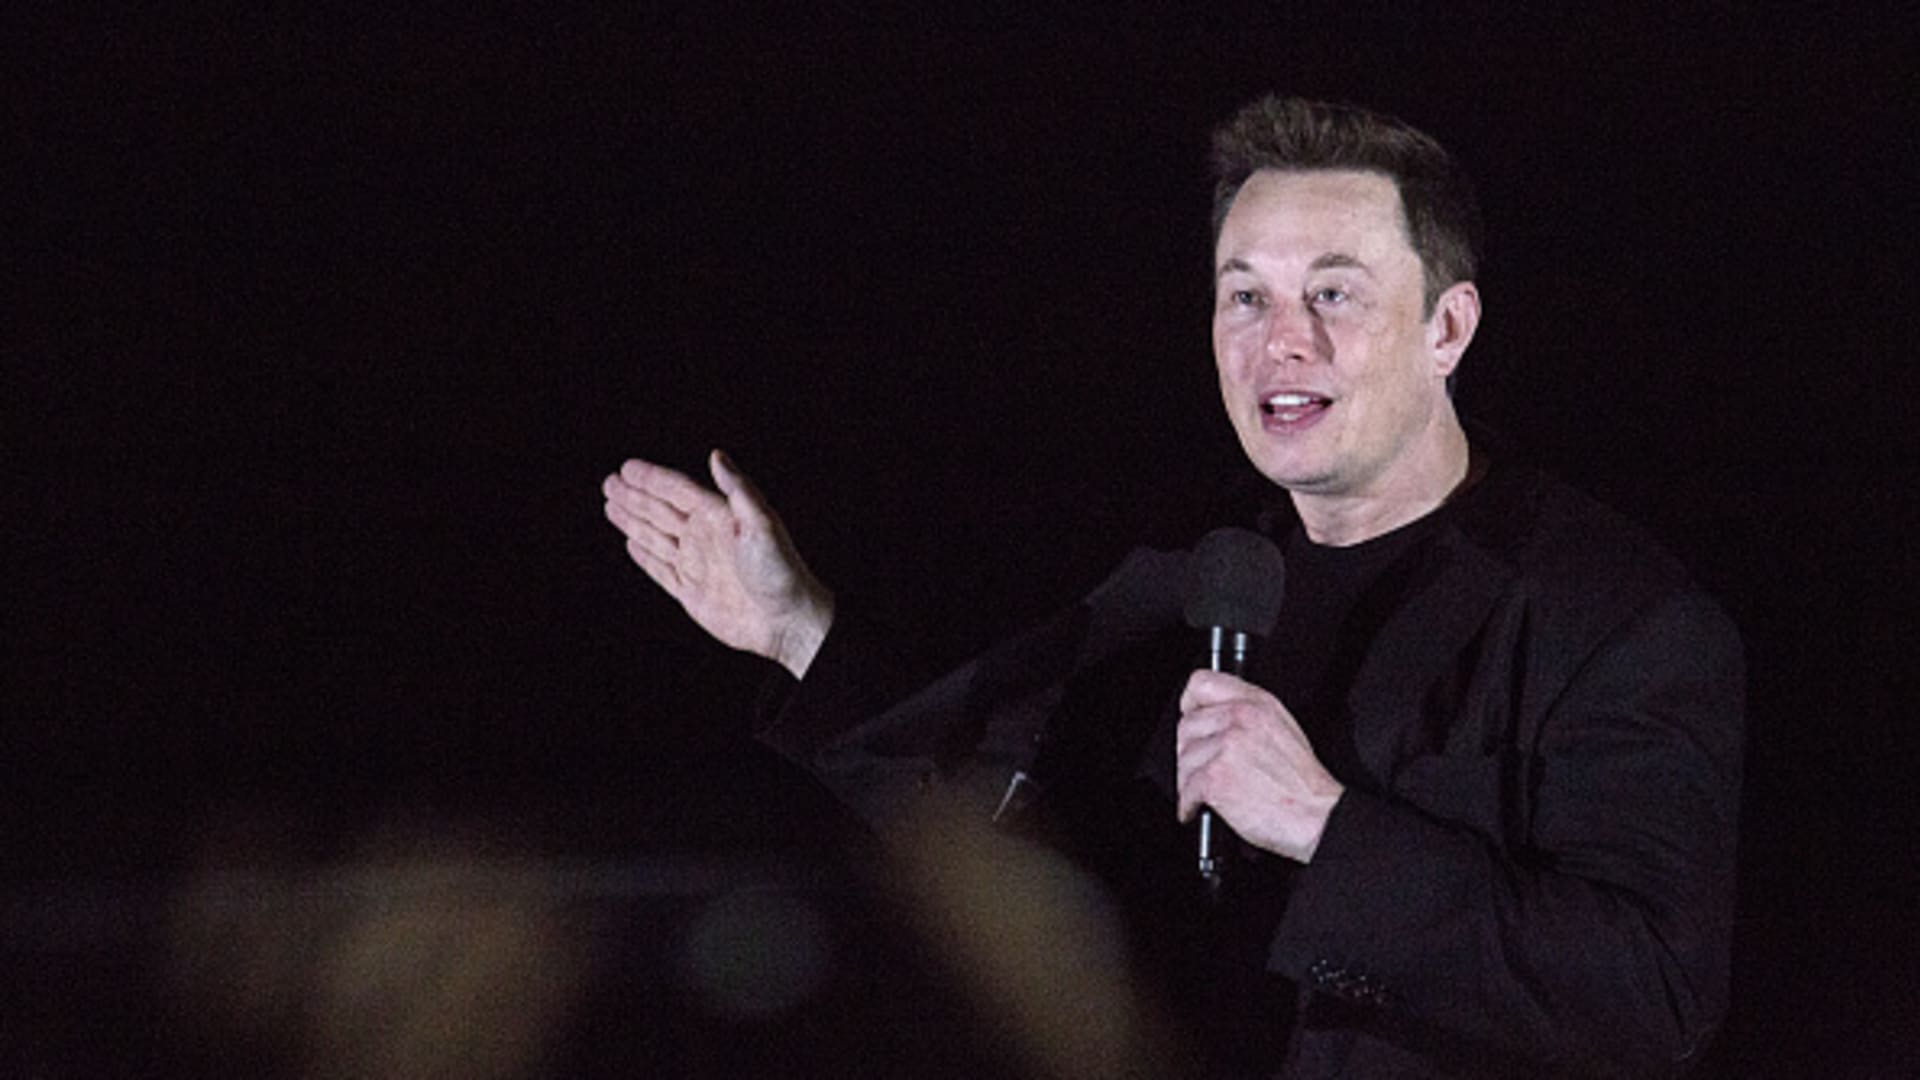 Elon Musk is 'highly confident' SpaceX will land humans on Mars by 2026